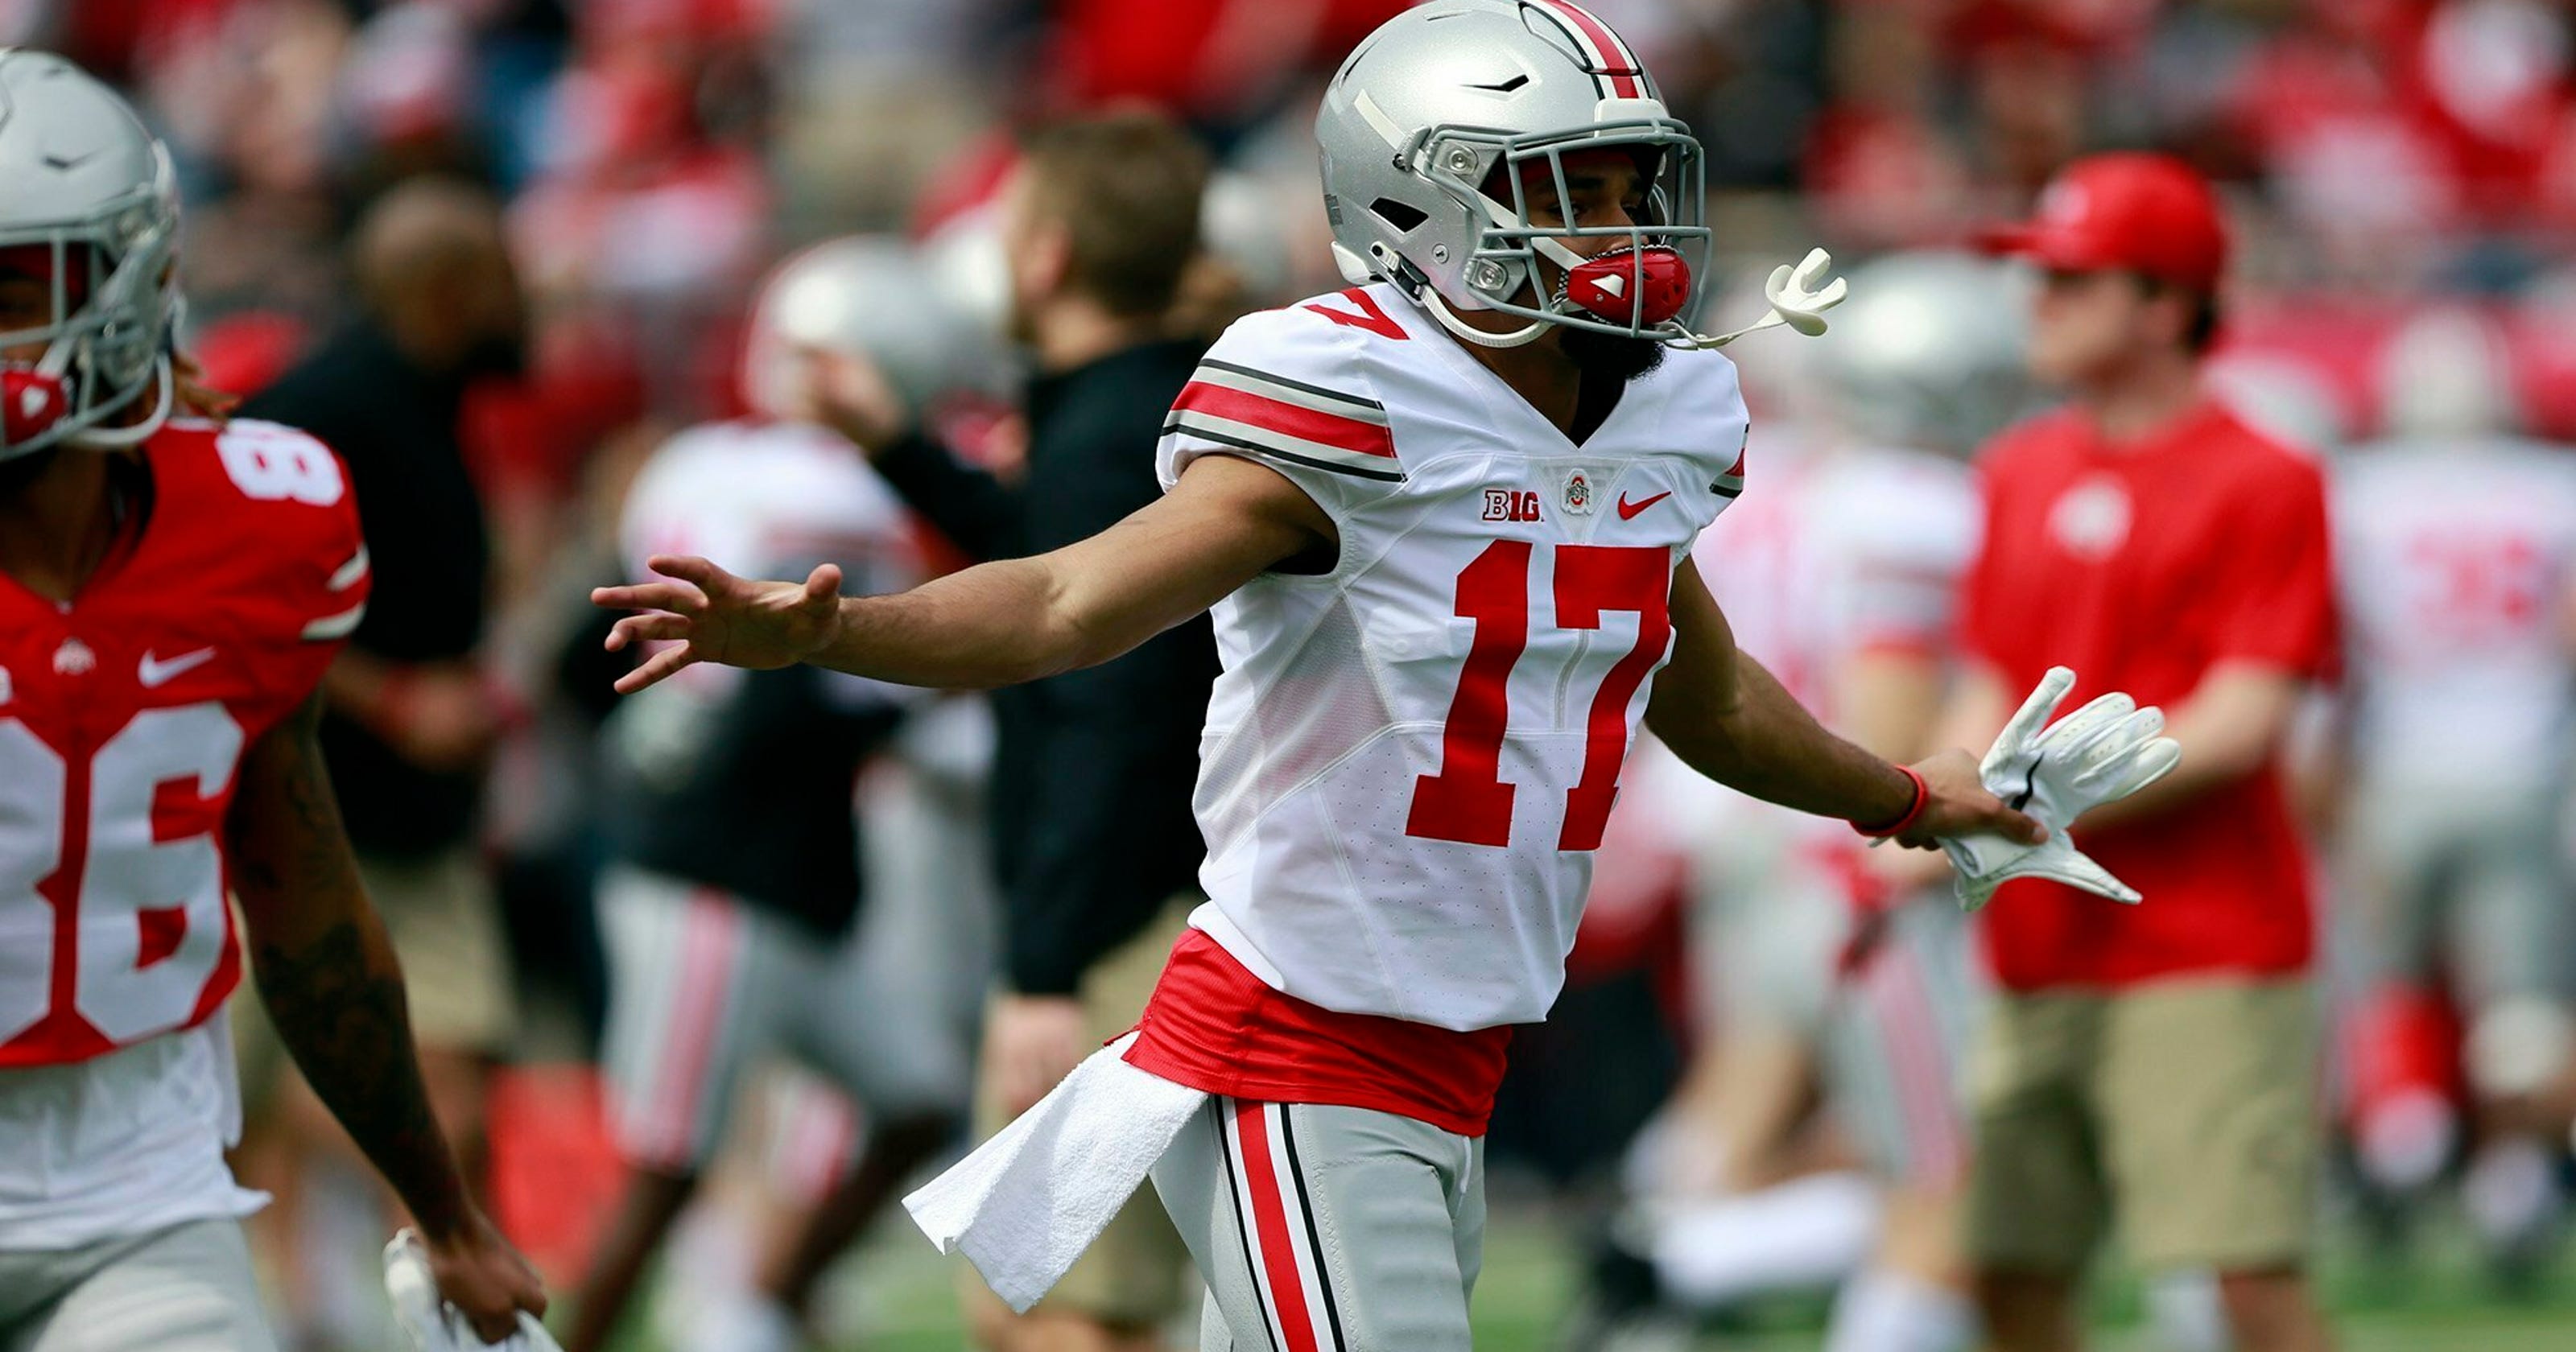 Is there really a quarterback competition at Ohio State?